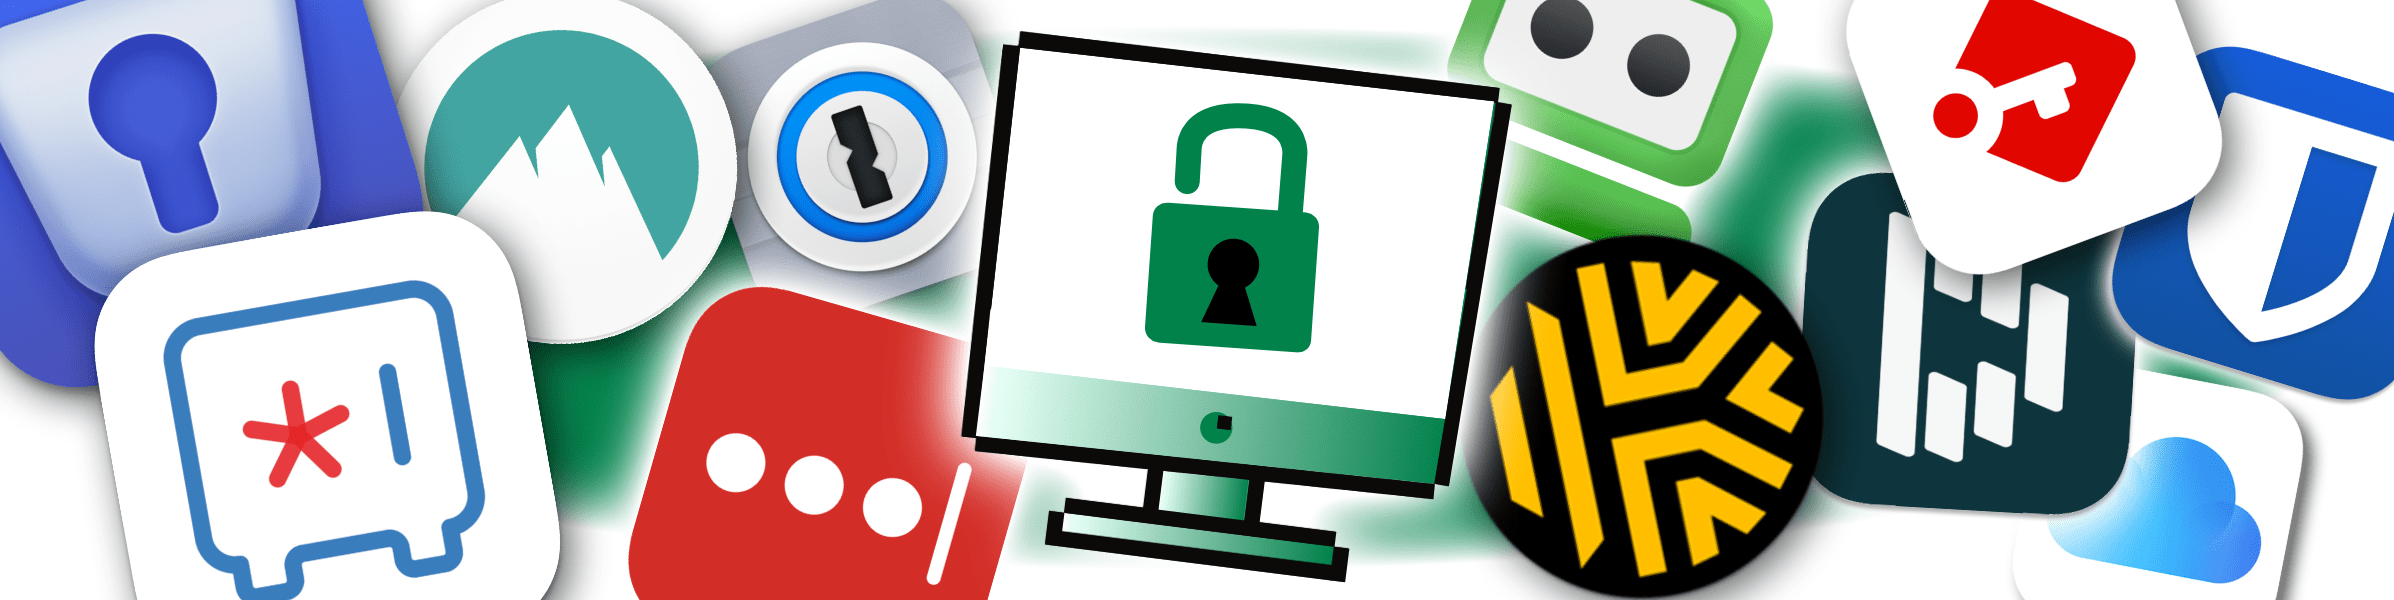 Boost Your Security, Use a Password Manager